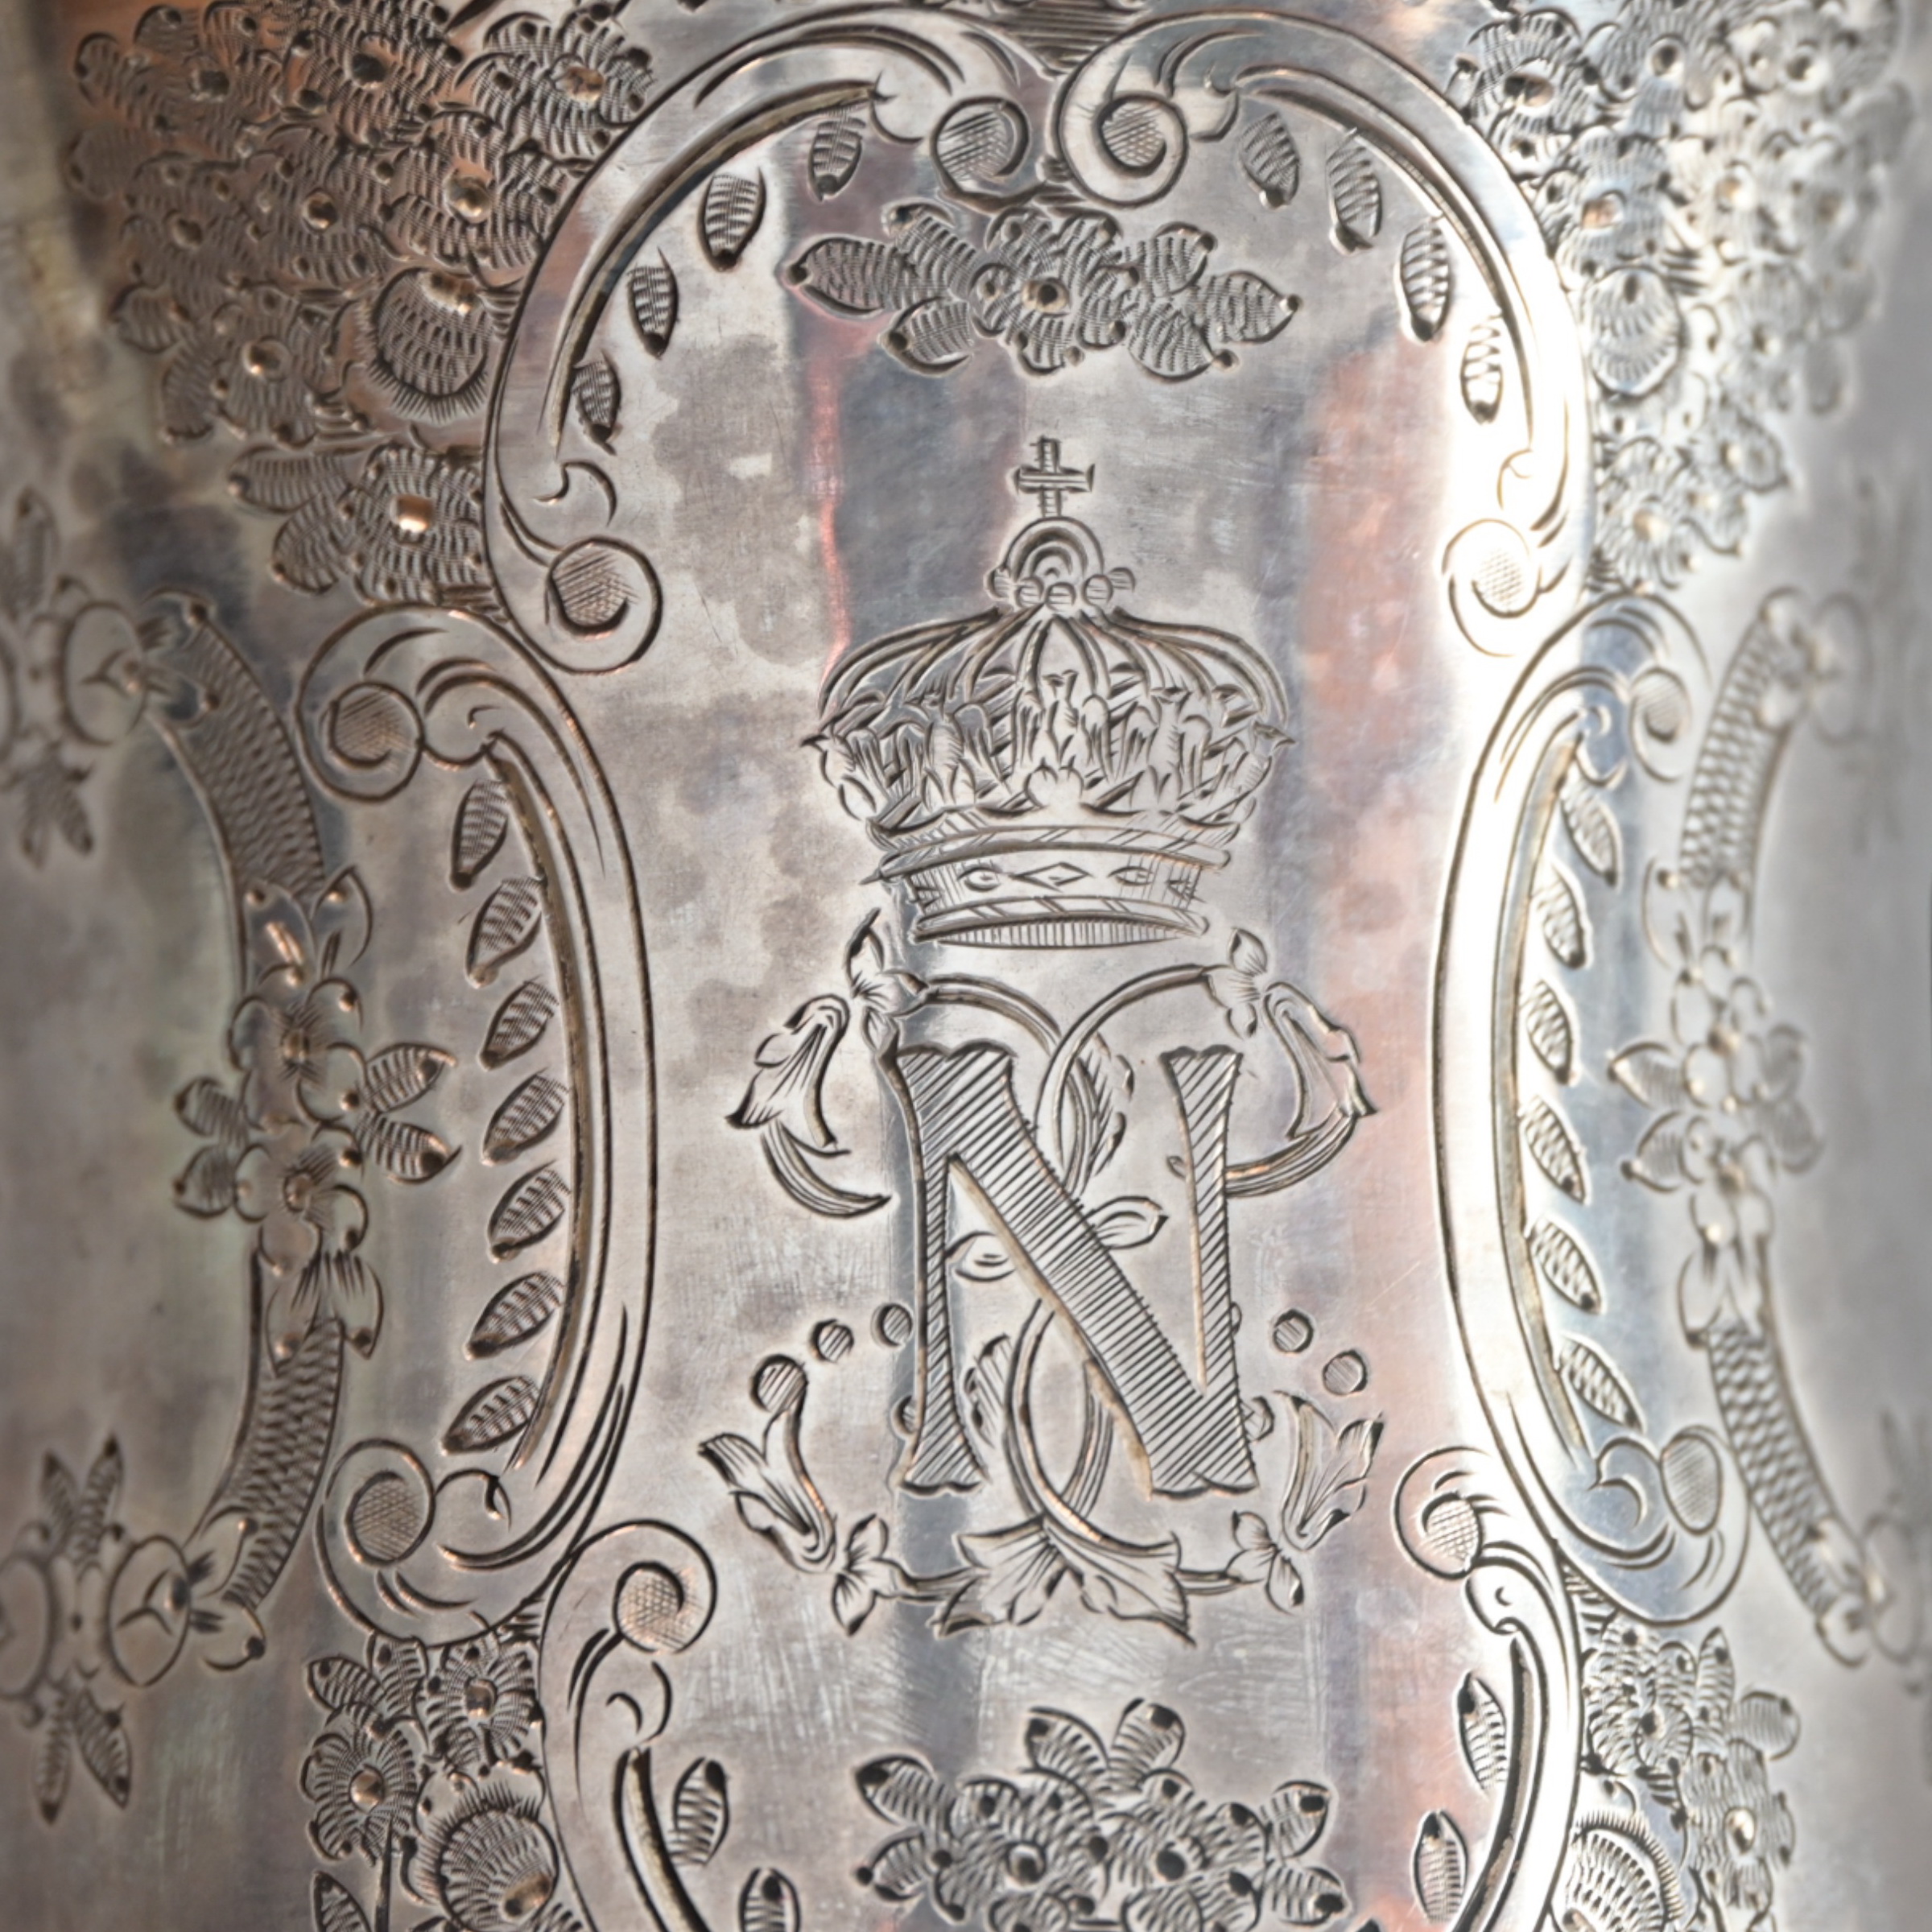 Baptismal goblet offered by Empress Eugenie and Emperor Napoleon III - Image 4 of 6